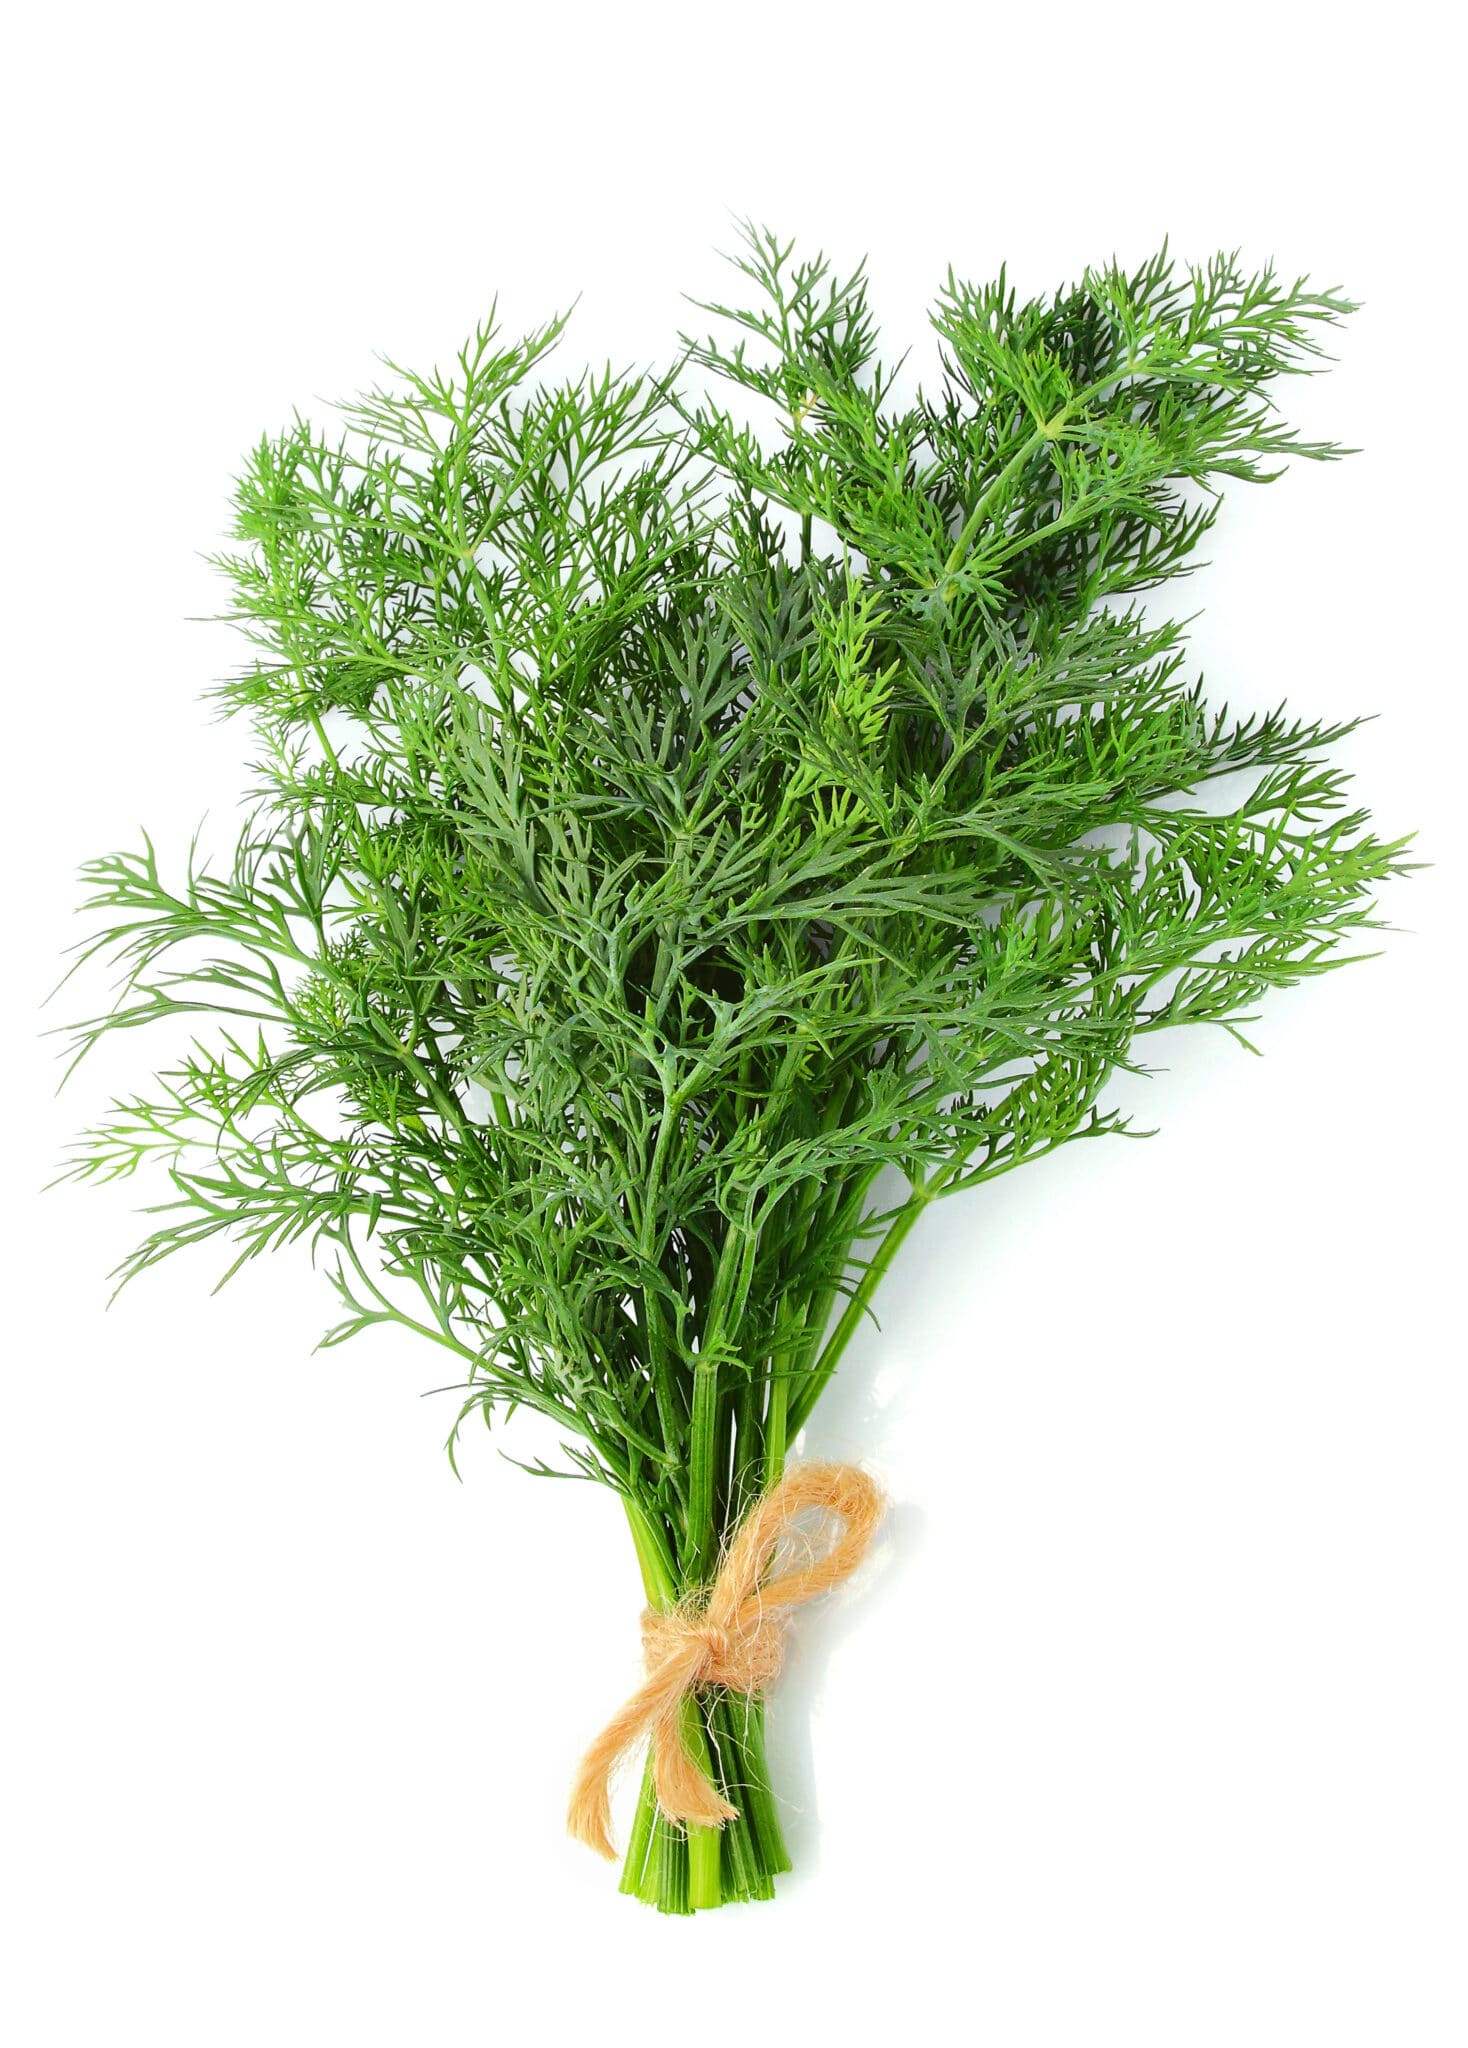 Growing and harvesting dill, Kitchen versatility, Herb's numerous uses, Culinary companion, 1470x2050 HD Handy